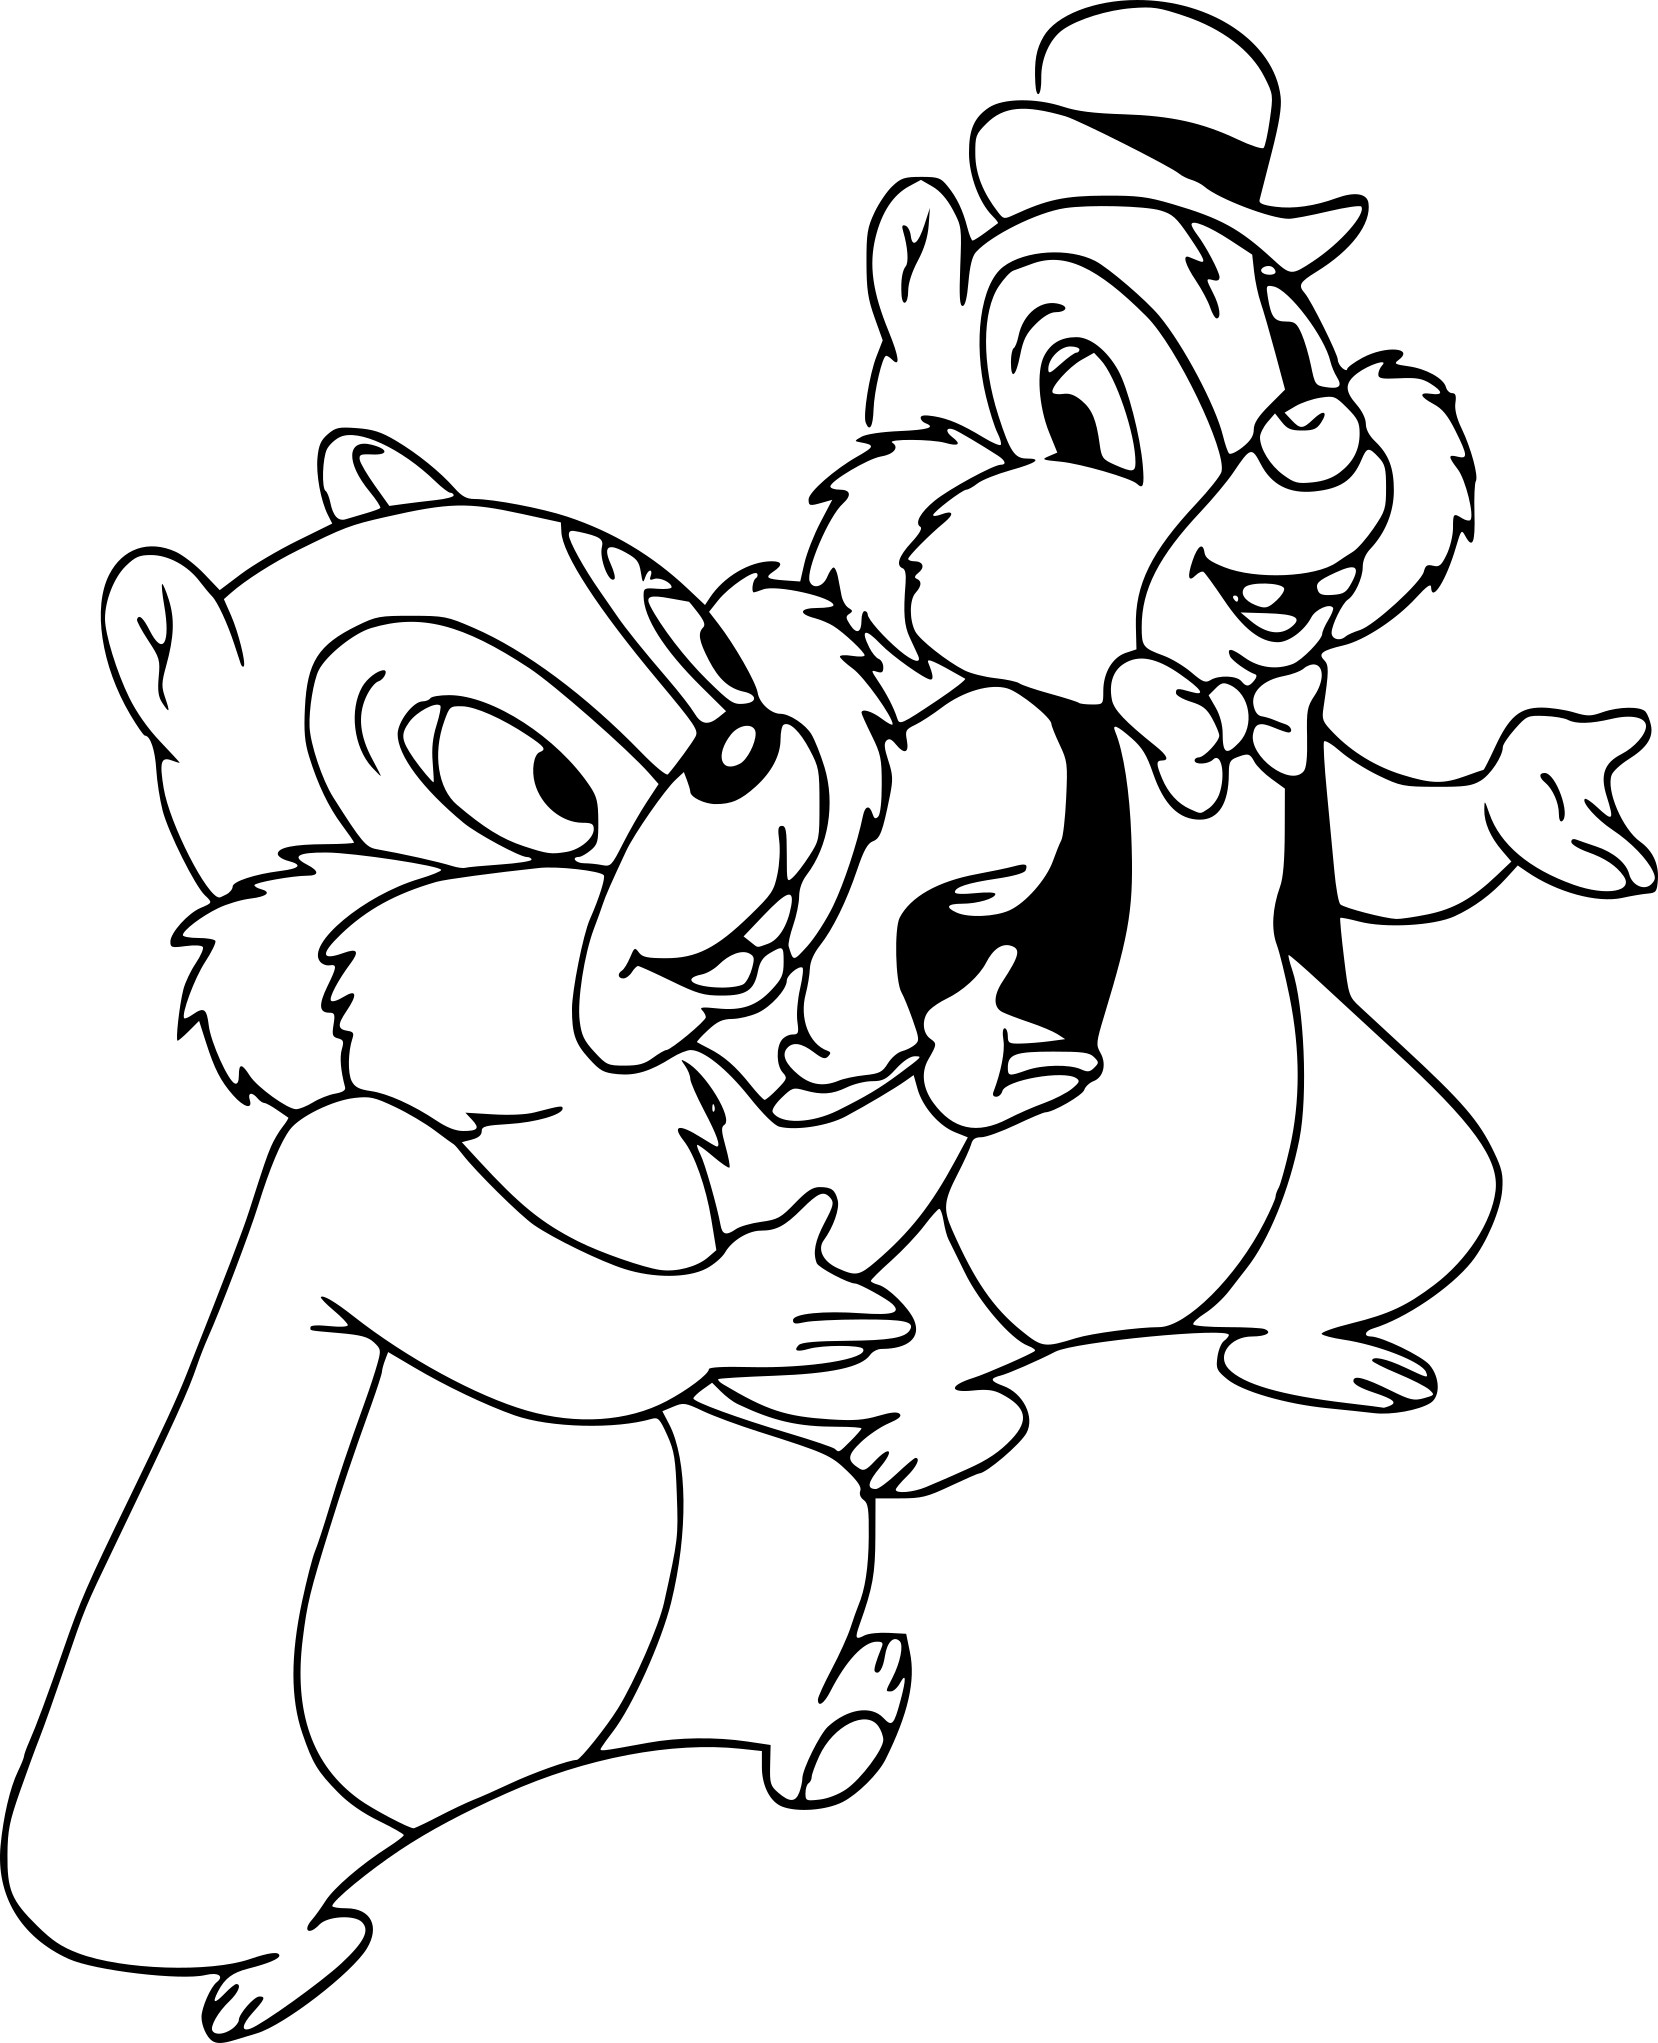 Tic And Tac coloring page